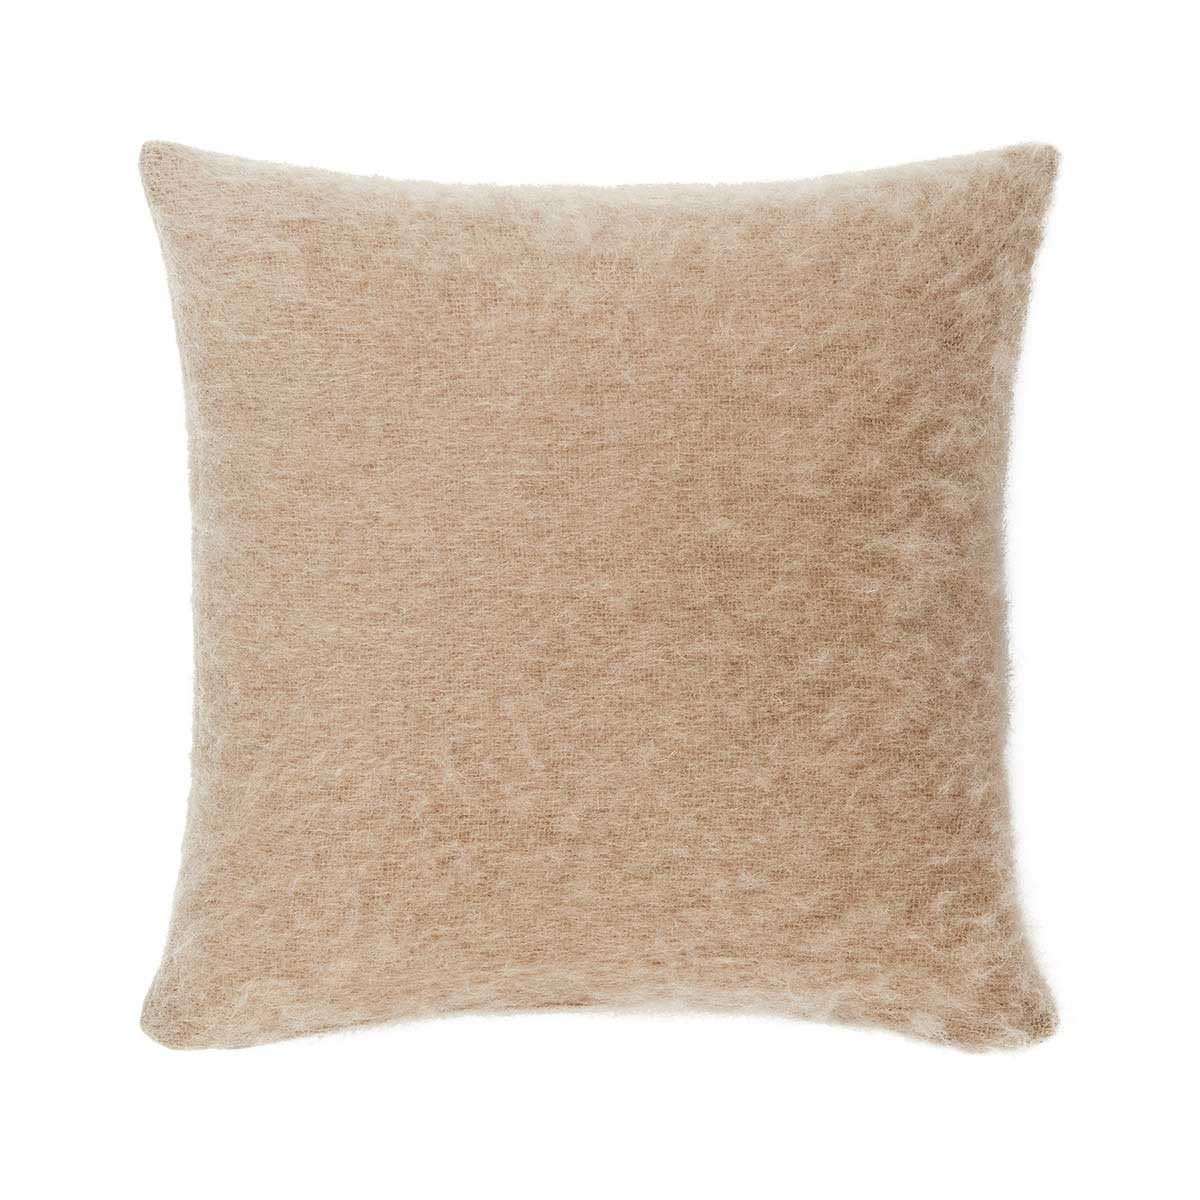 Noisette Mohair Decorative Pillow by Yves Delorme | Fig Linens